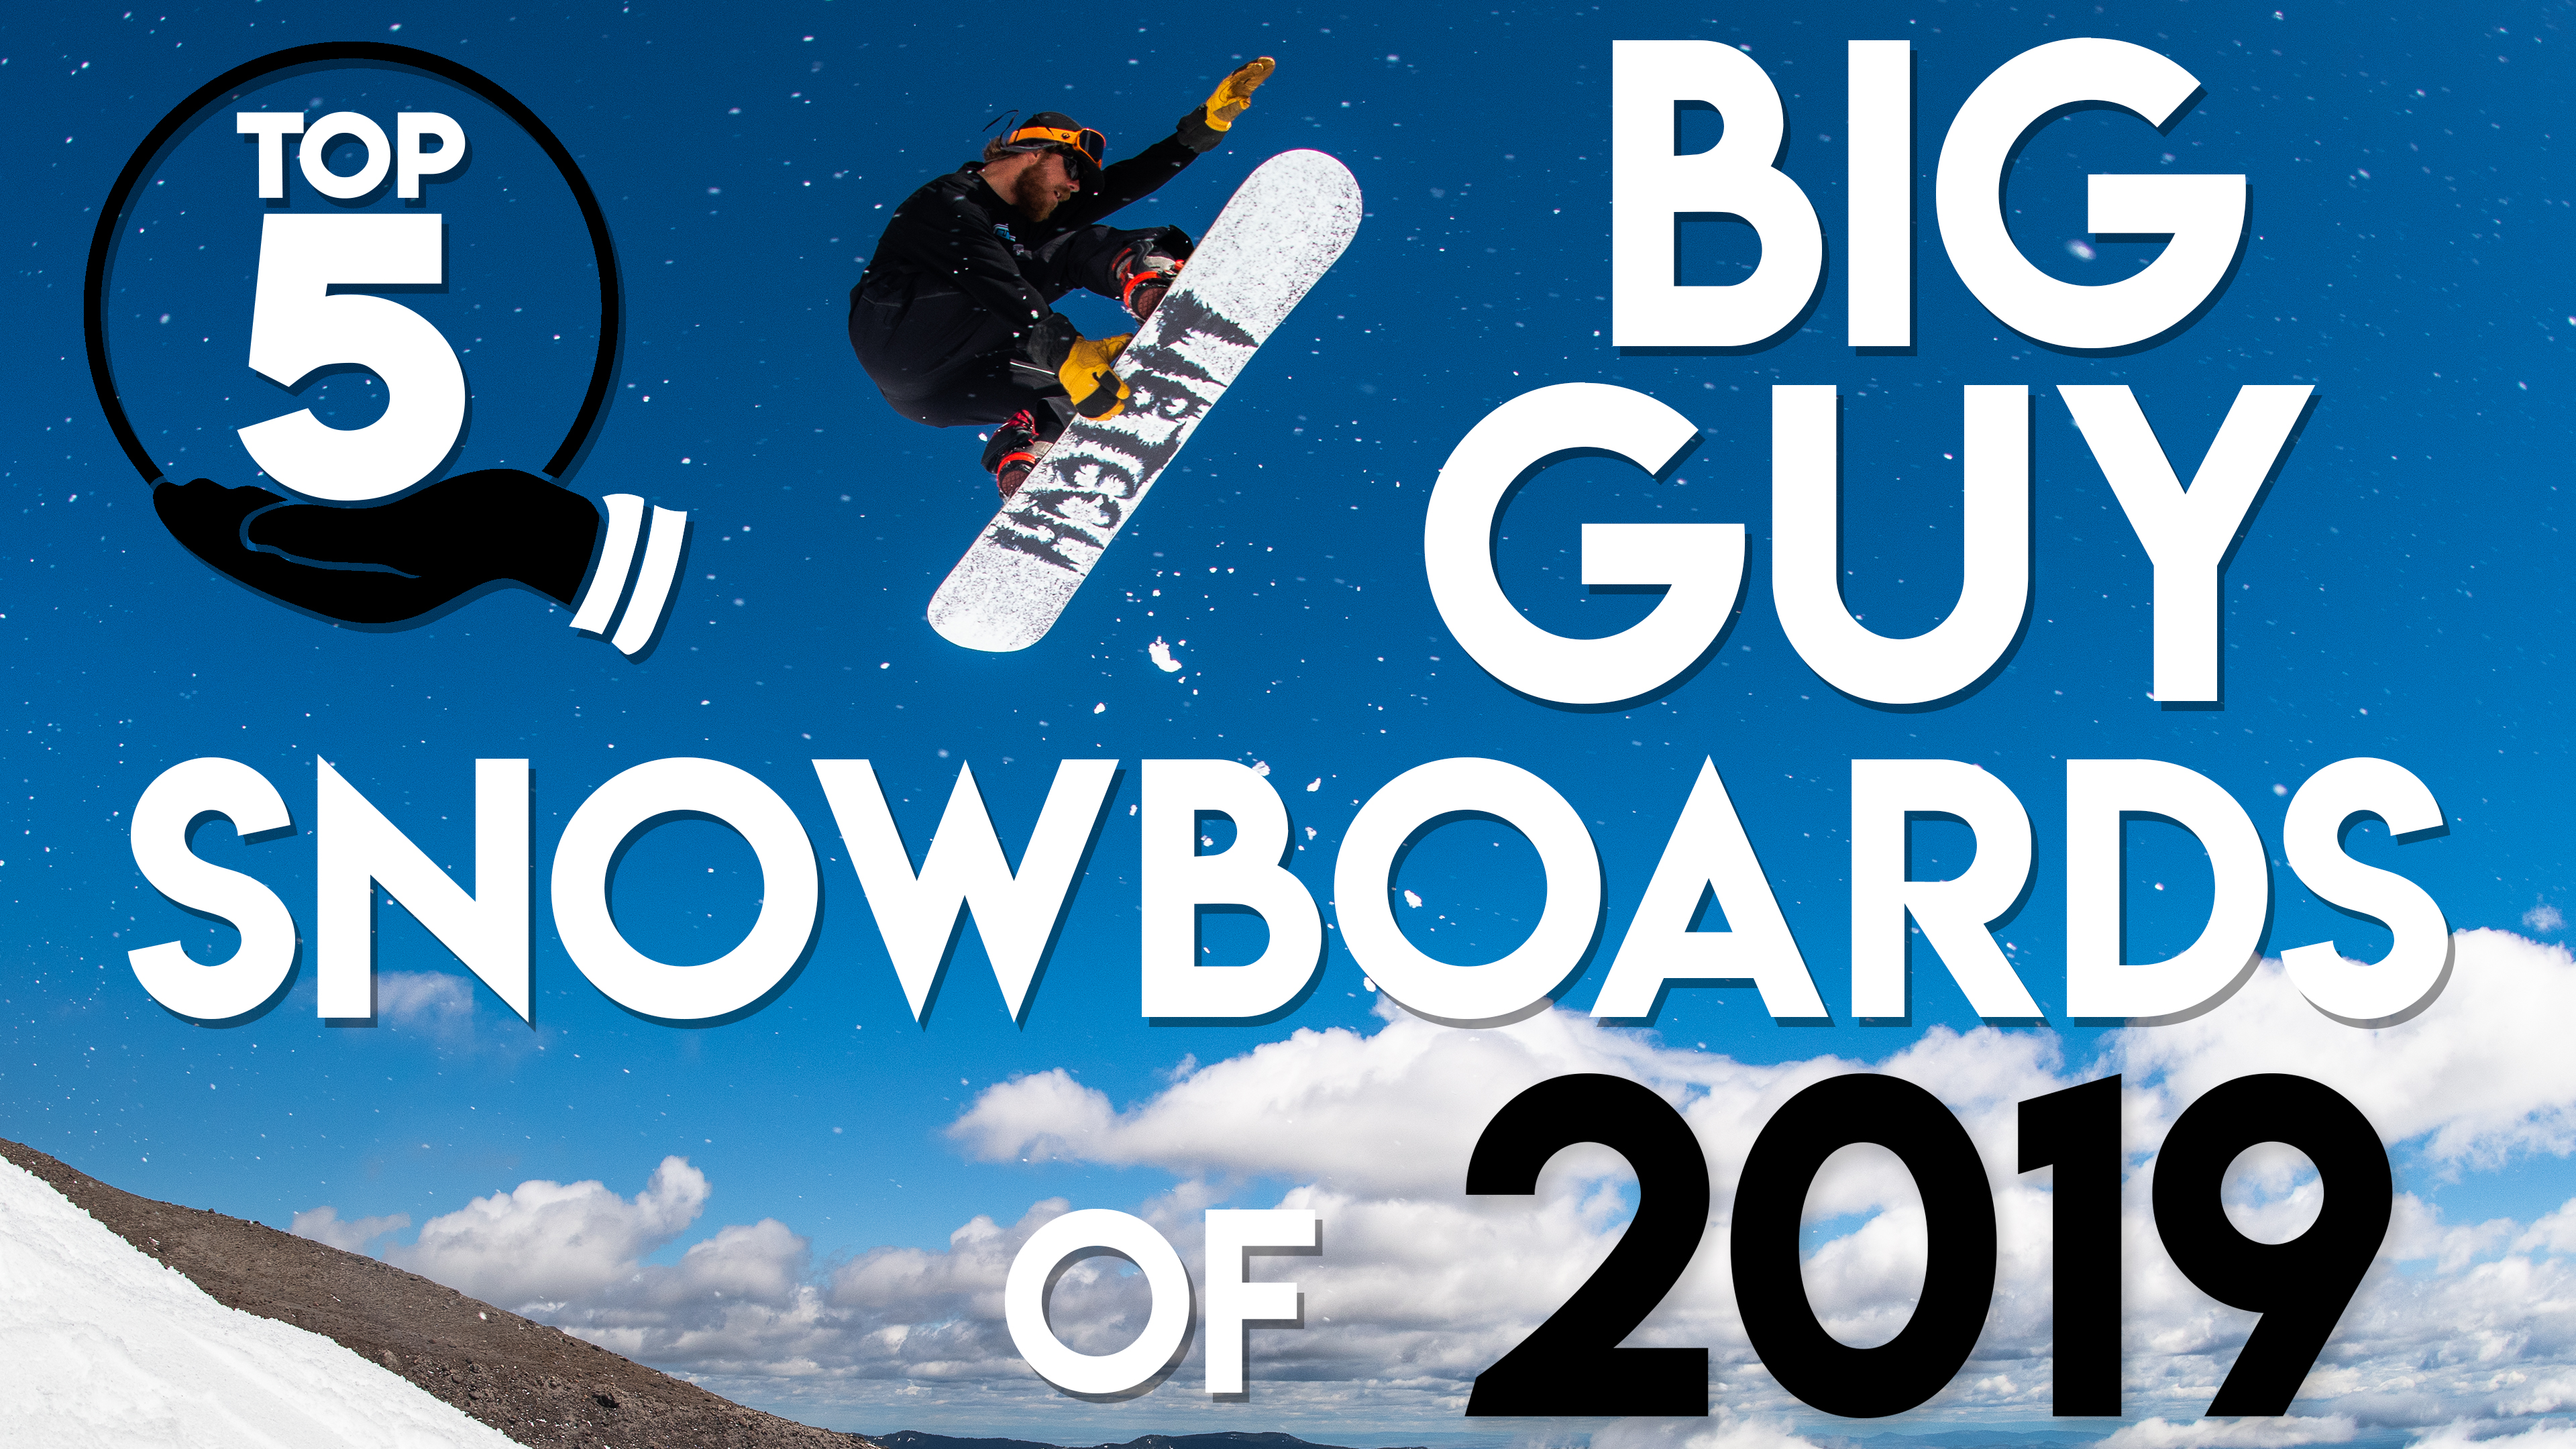 allocation Turning other Top 5 "Big Guy" Snowboards of 2019 - The-House